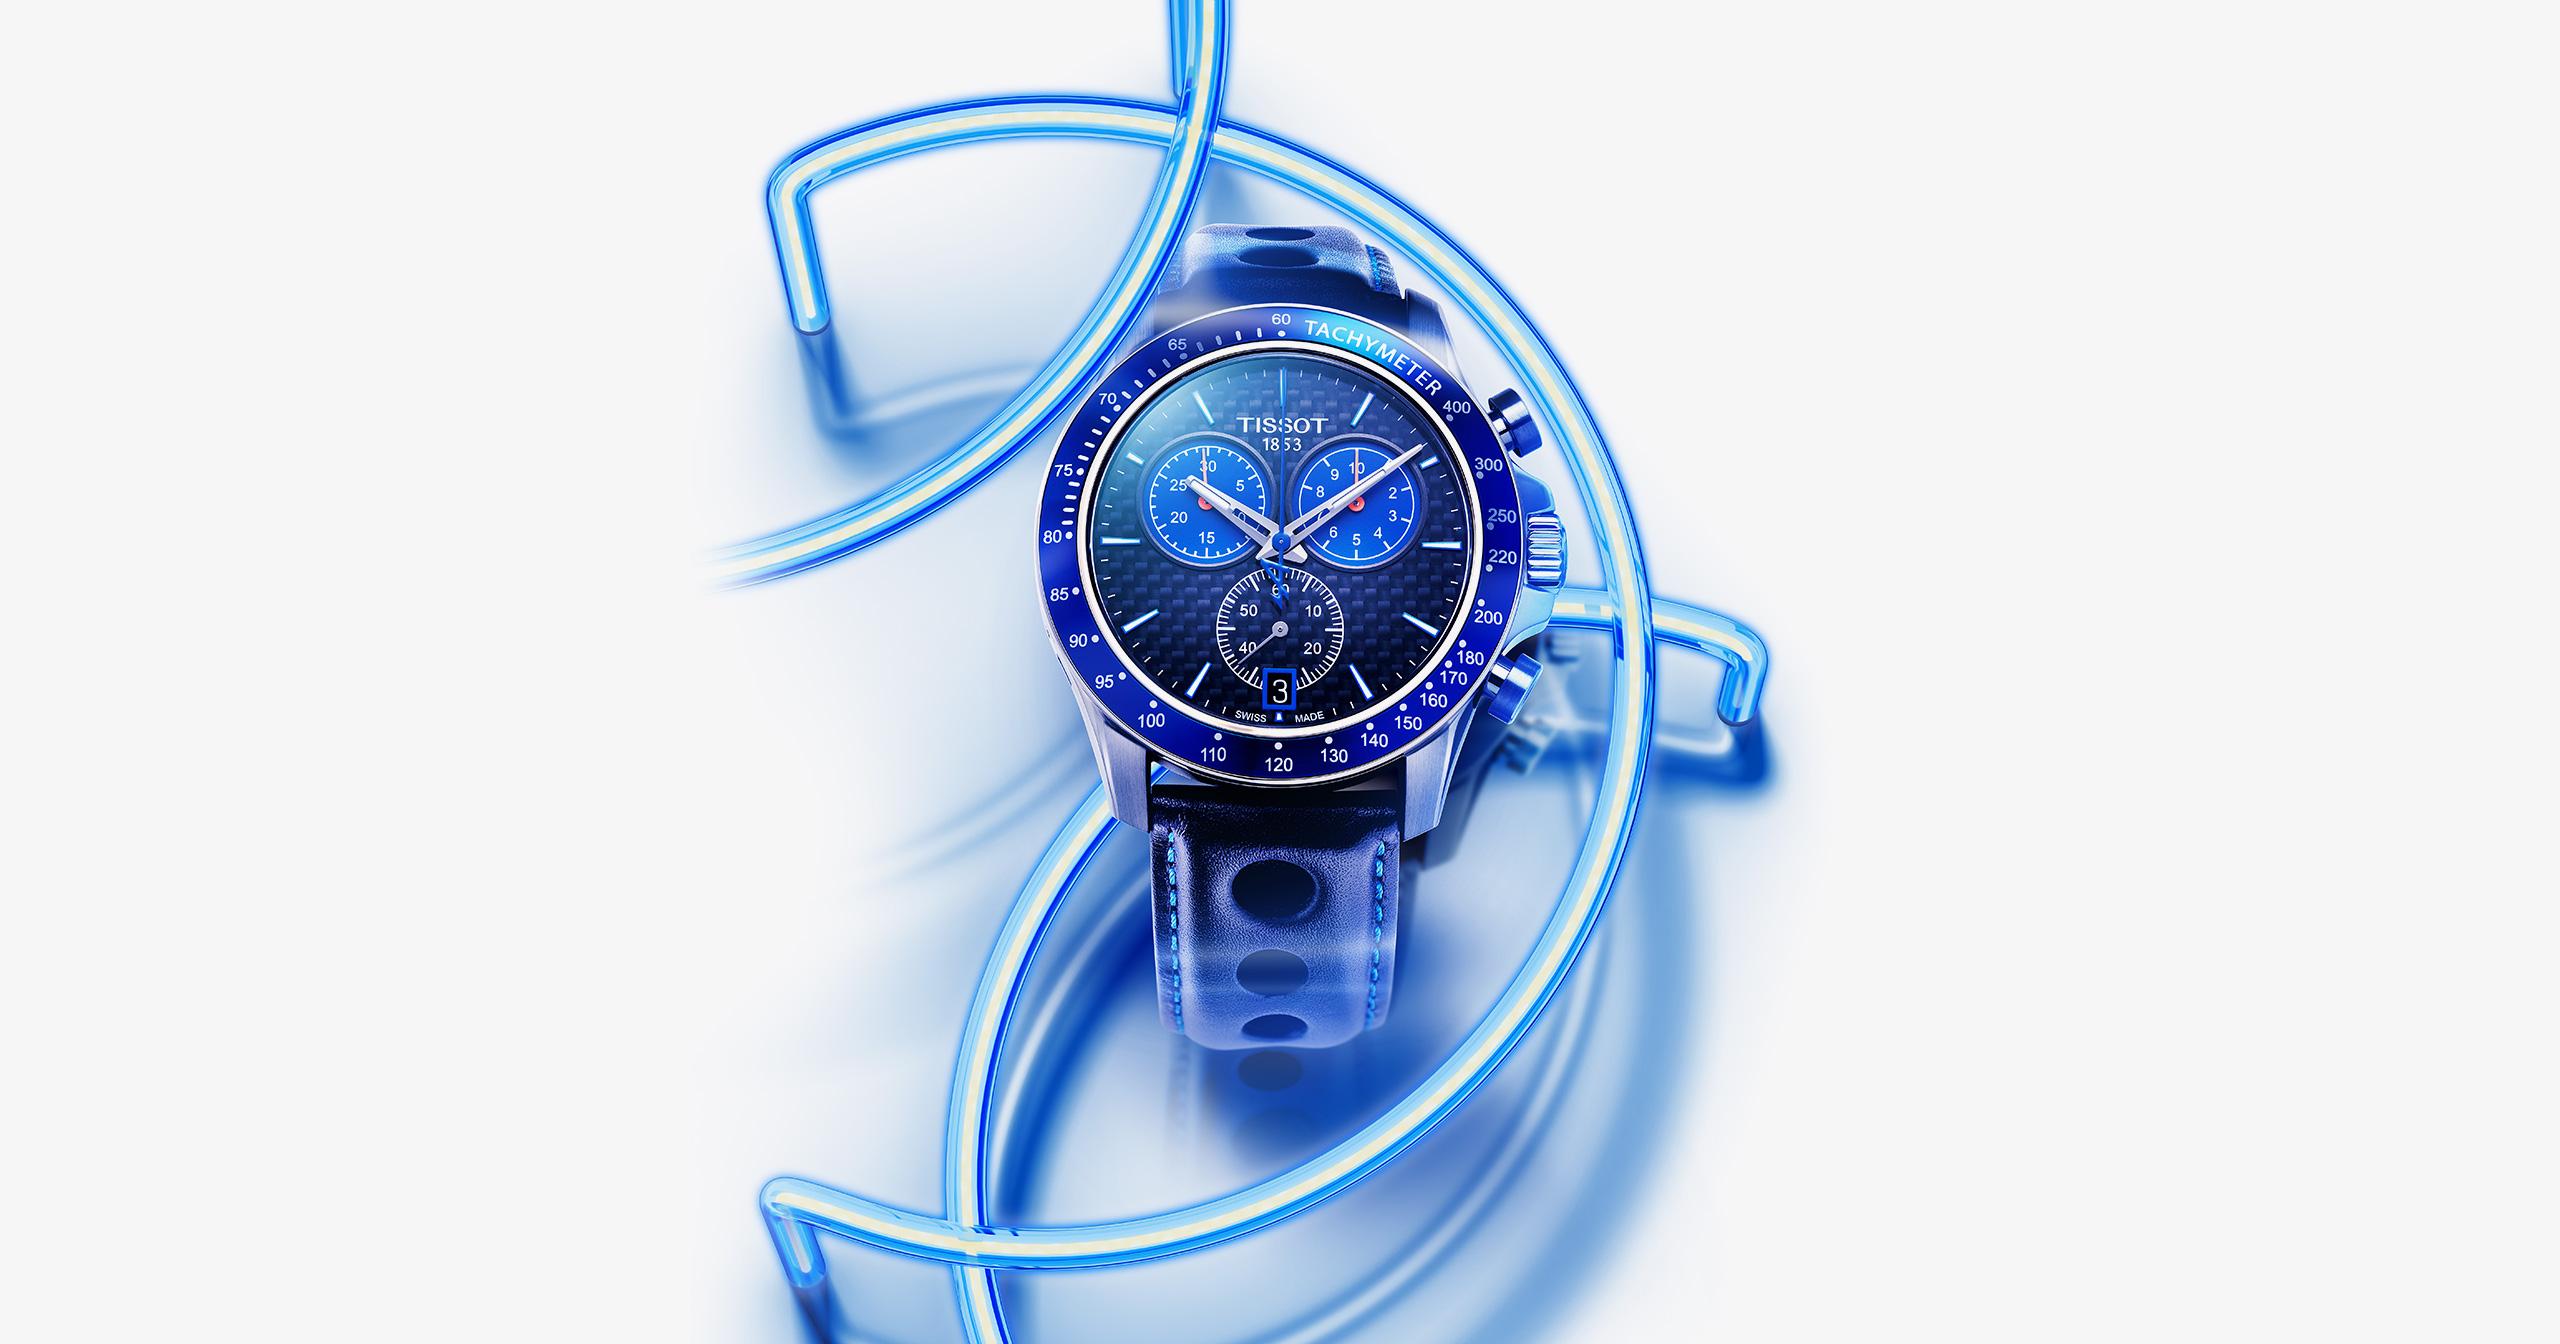 Tissot Watch displayed with dynamic shapes and neon lighting effects in 3D/CGI for magazine feature